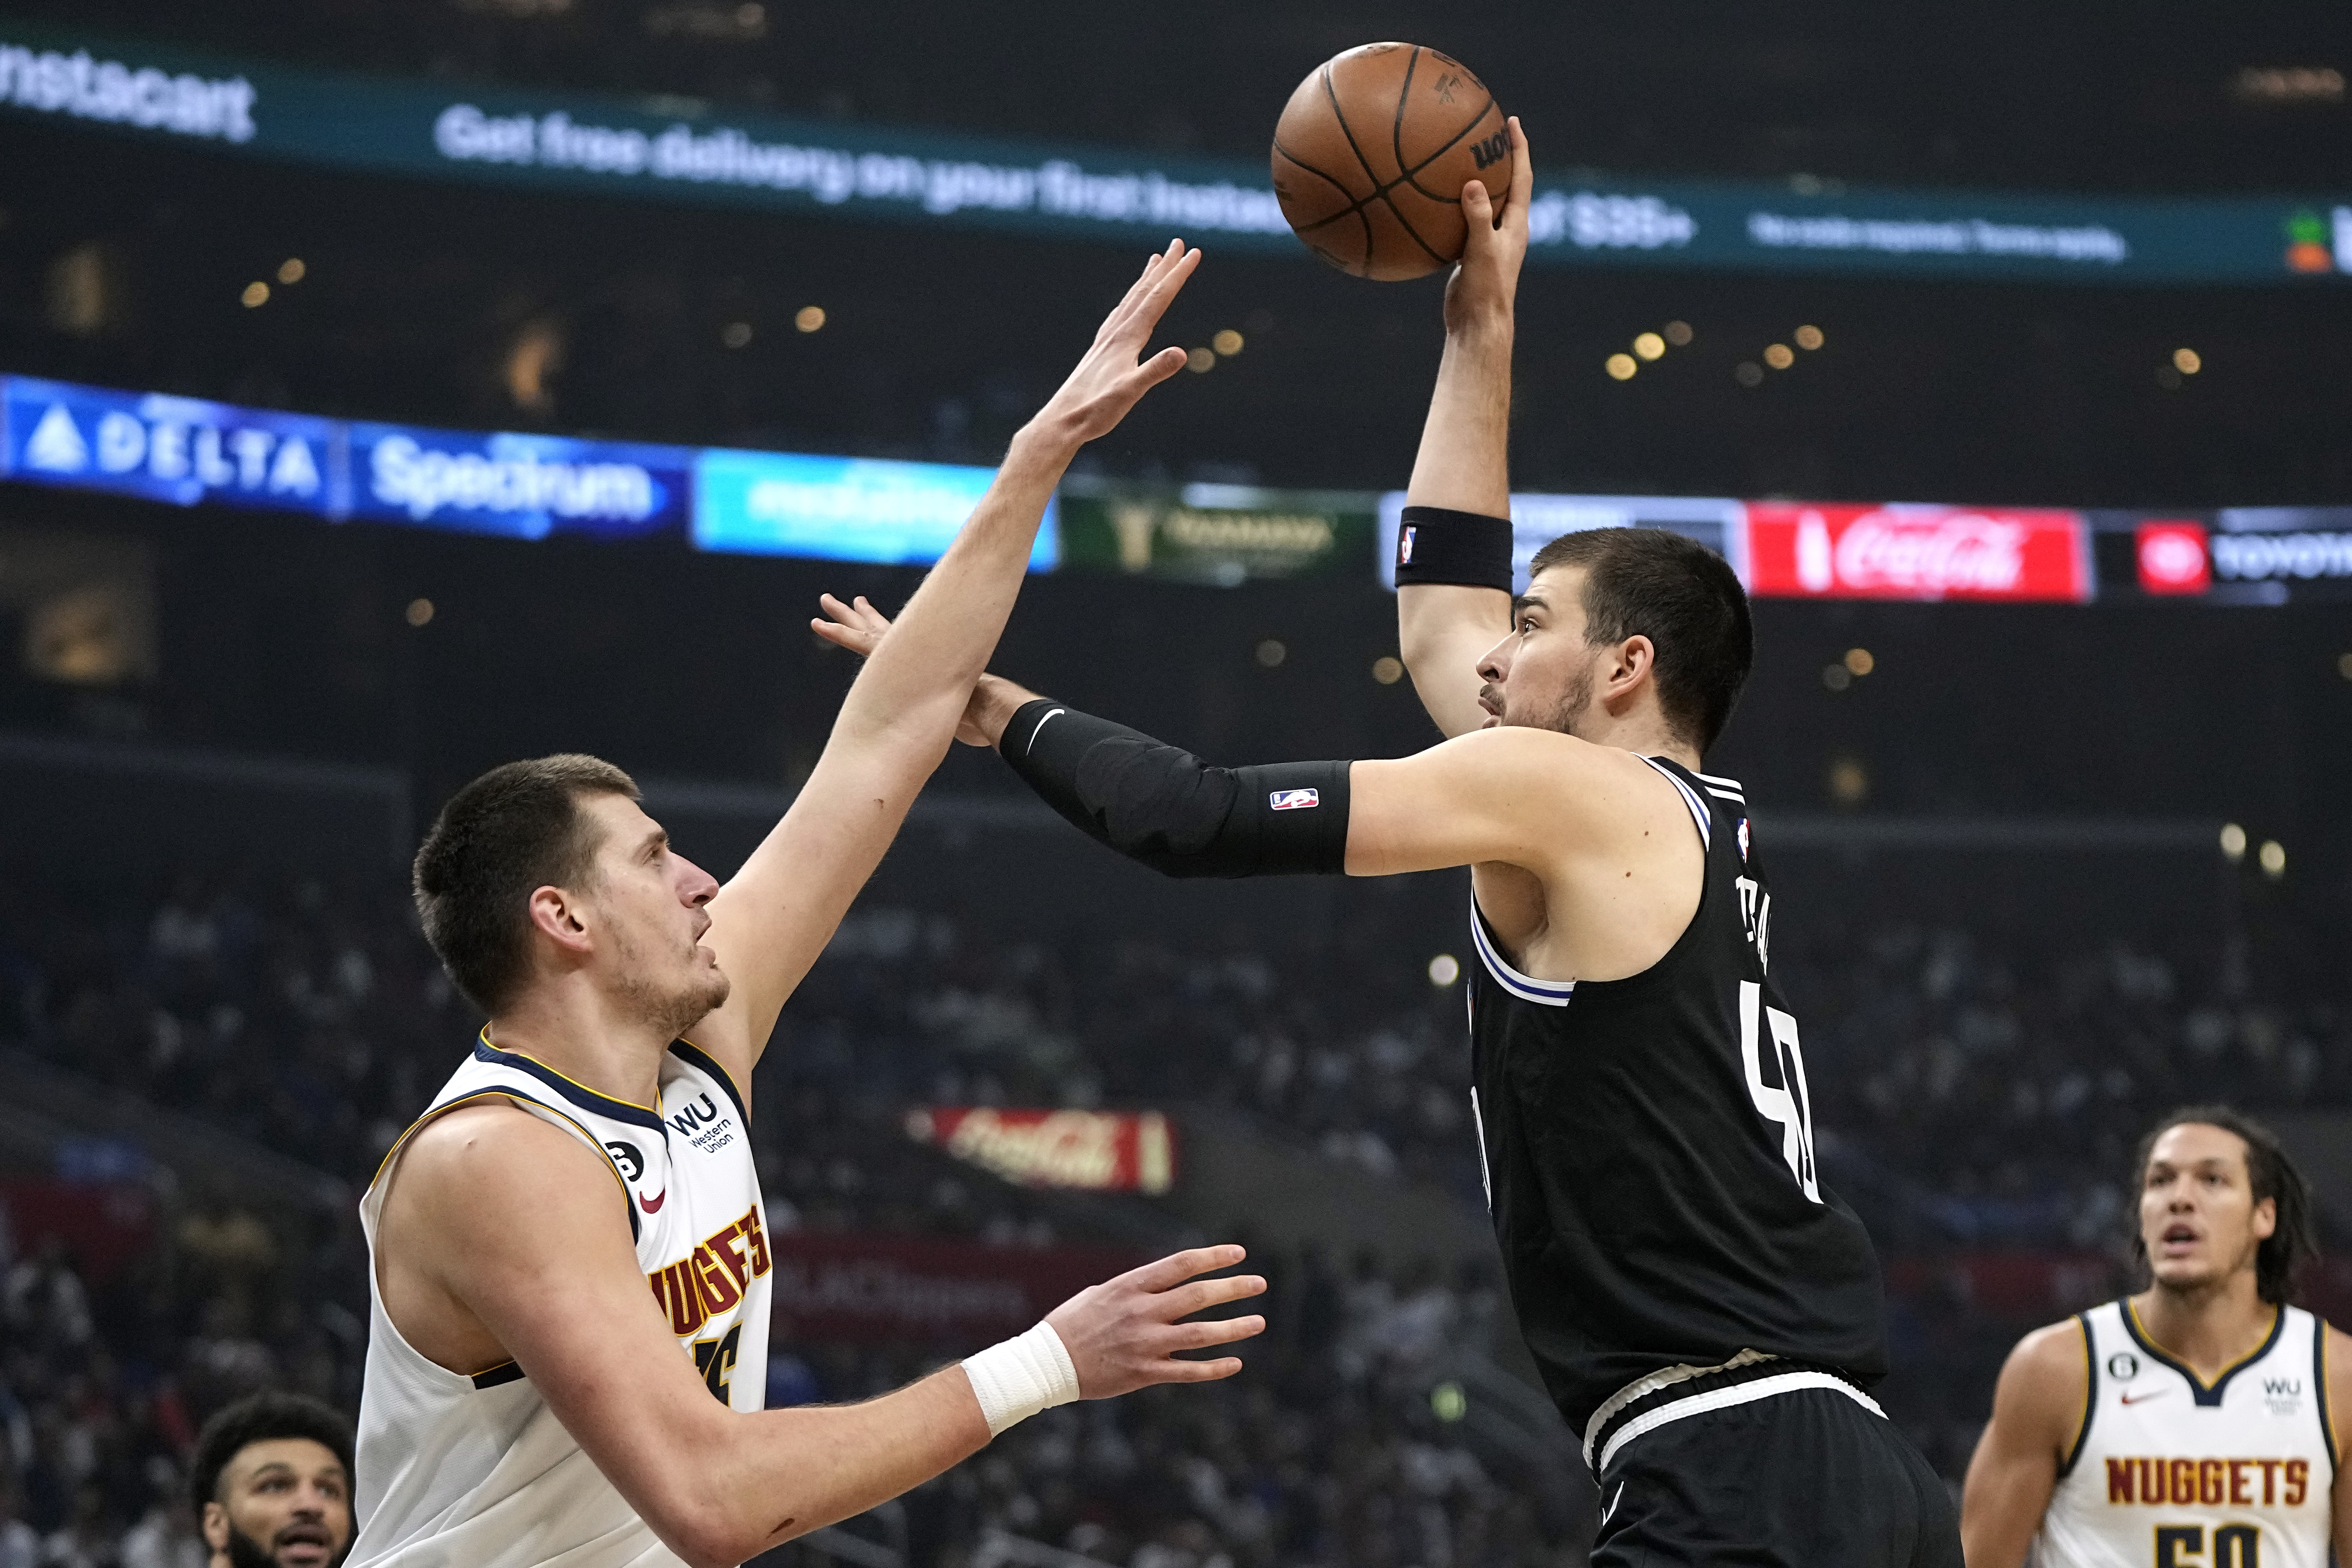 NBA's injury issues make MVP race more unpredictable - The Aggie